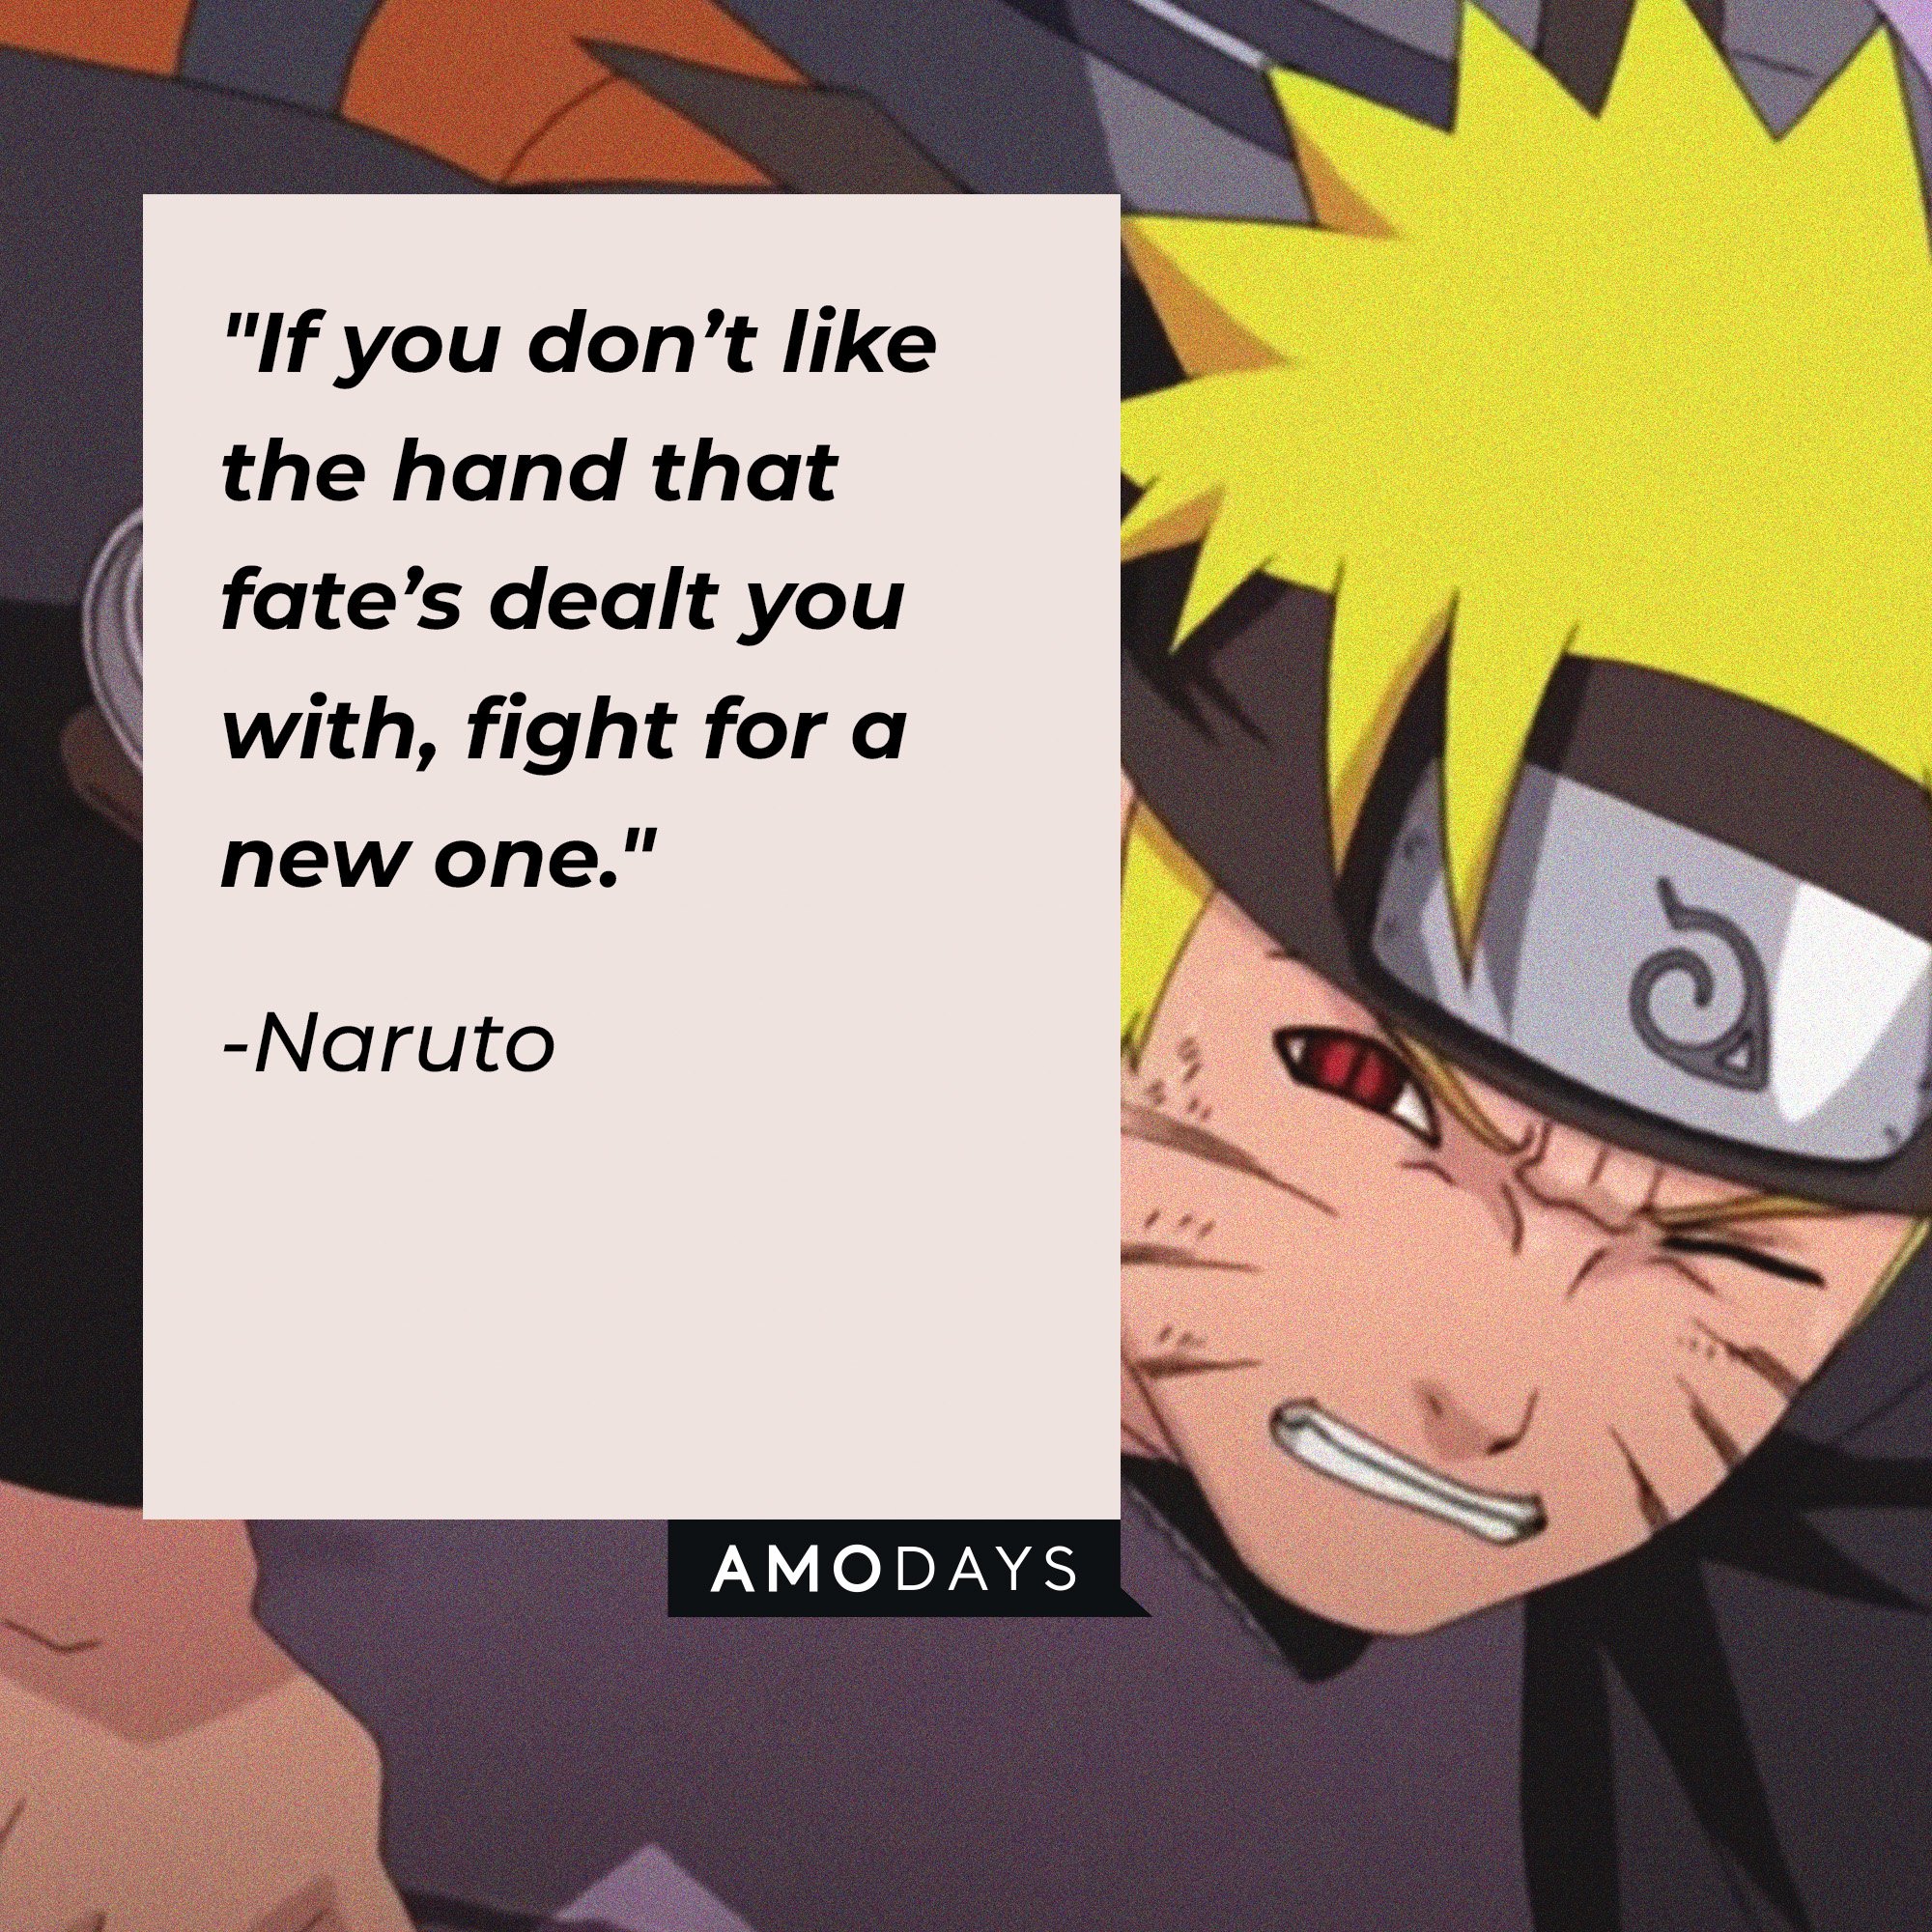 Naruto's quote: "If you don’t like the hand that fate’s dealt you with, fight for a new one." | Image: AmoDays